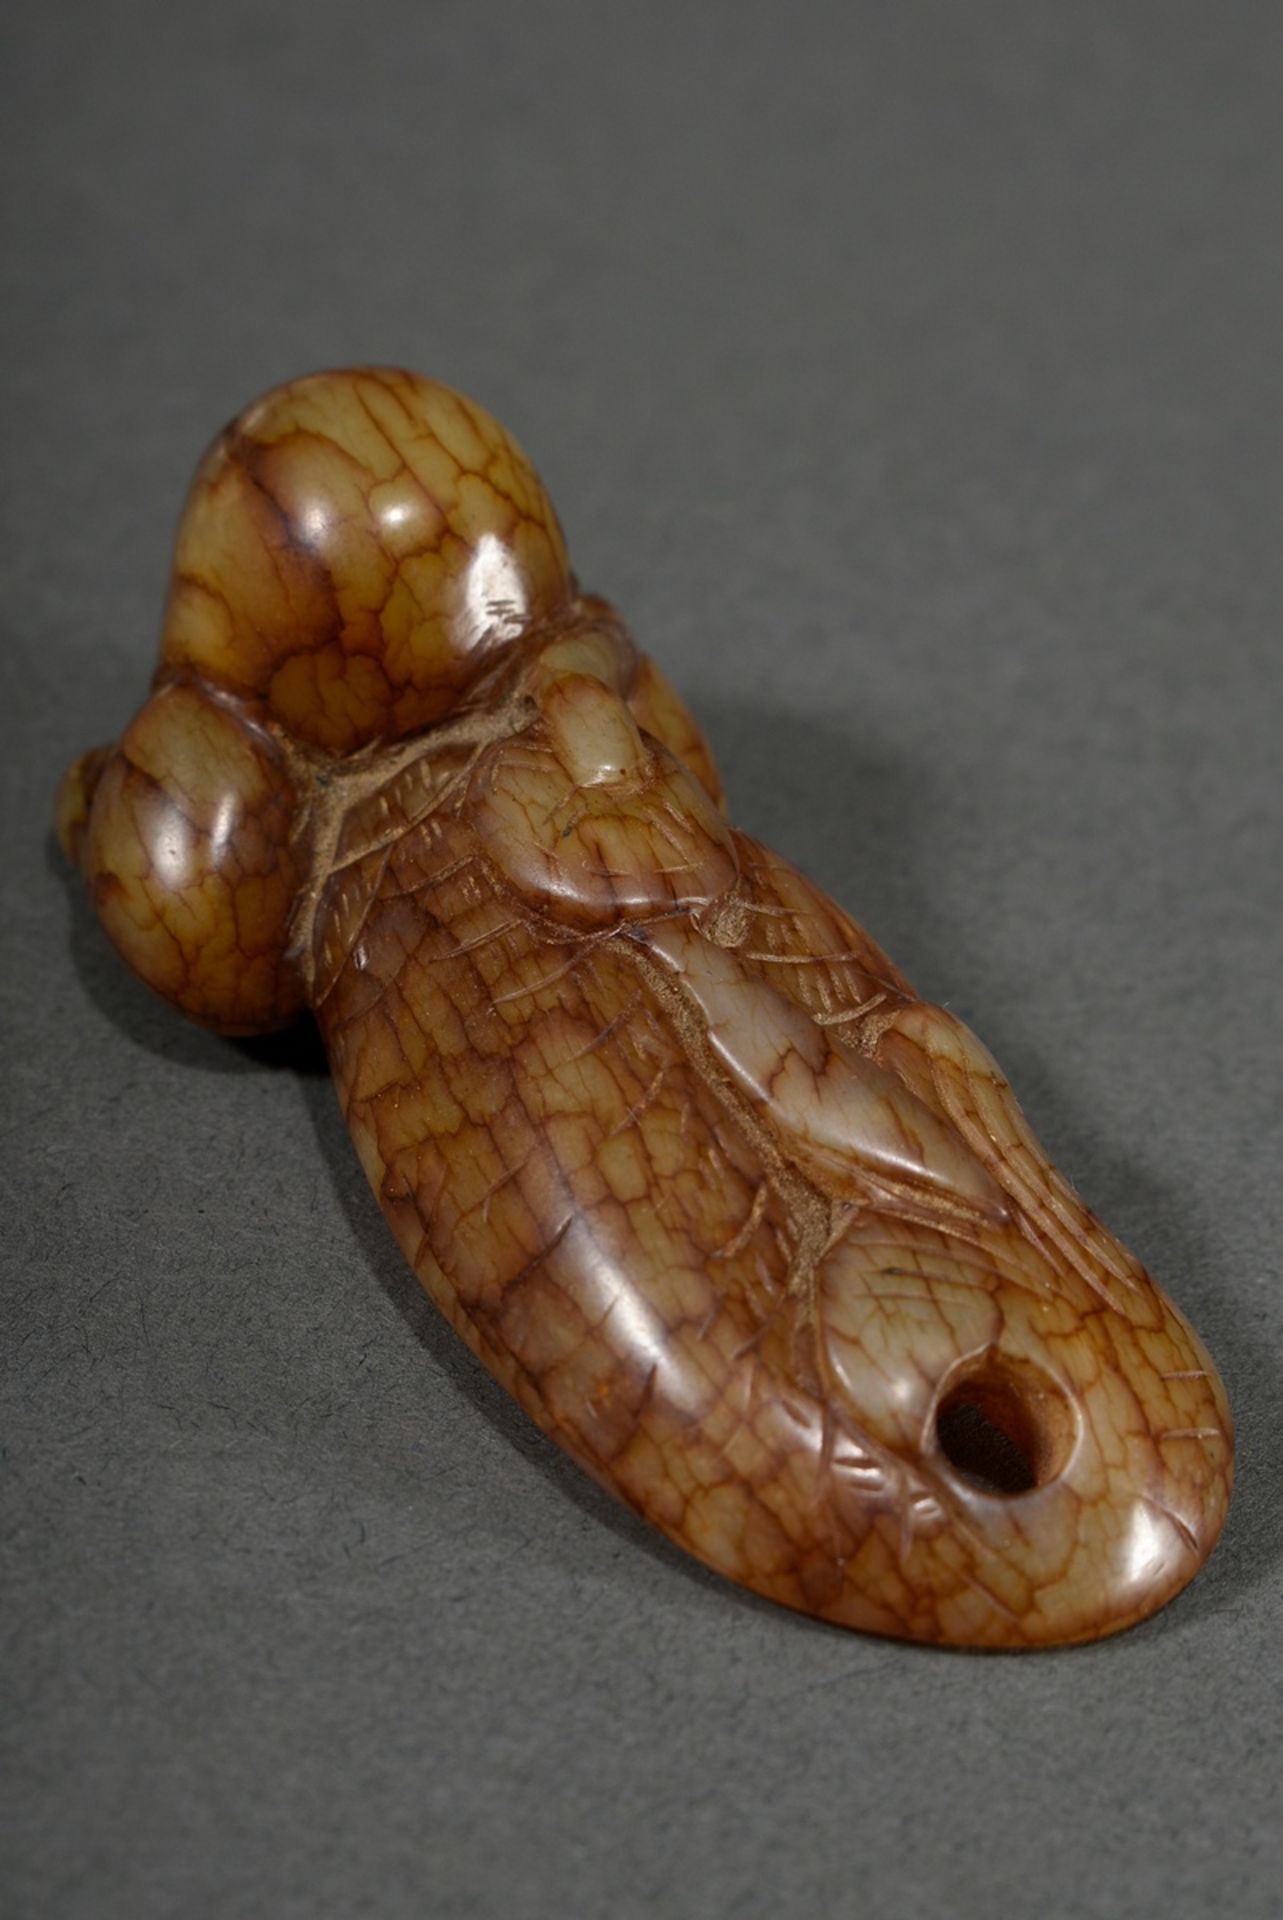 Fine figure of brown veined jade "Lying Mermaid", Ming or later, China, l. 7.5cm - Image 4 of 6